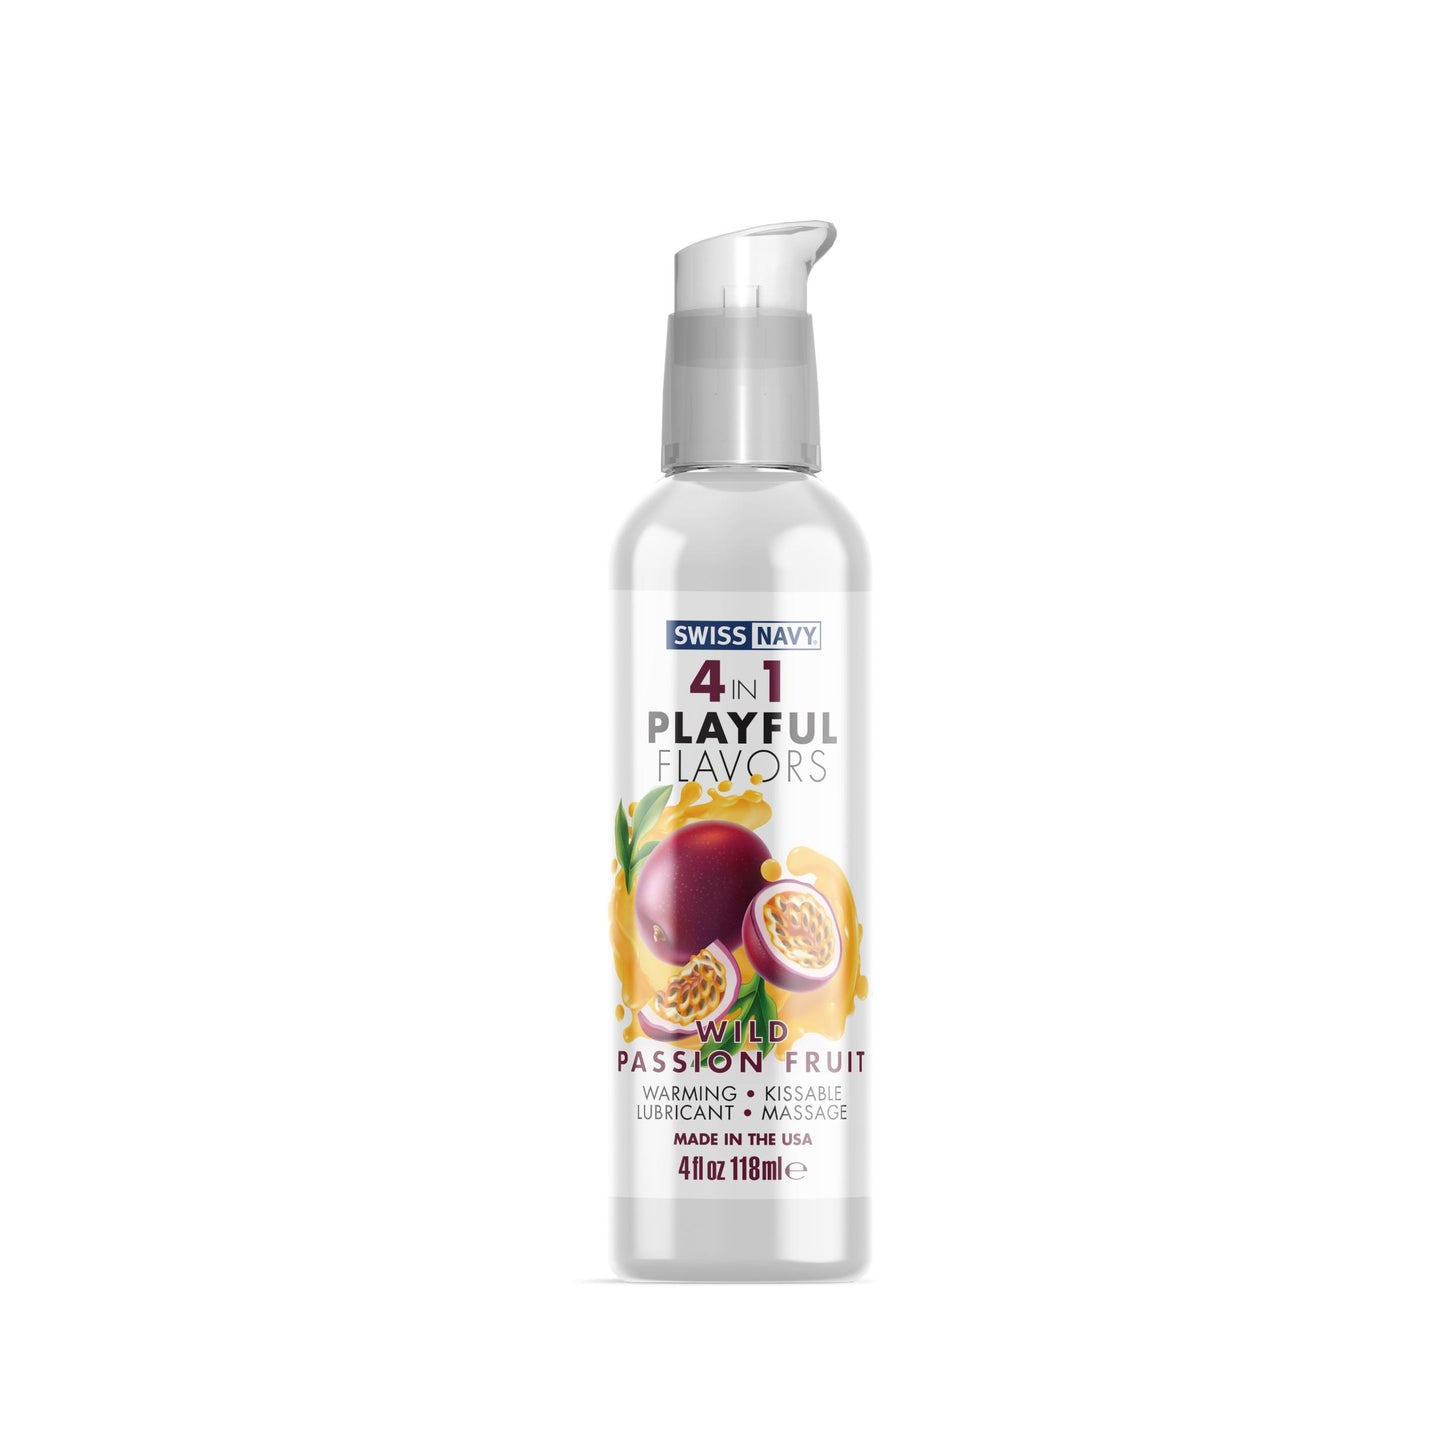 Swiss Navy 4-in-1 Playful Flavors - Wild Passion  Fruit - 4 Fl. Oz.